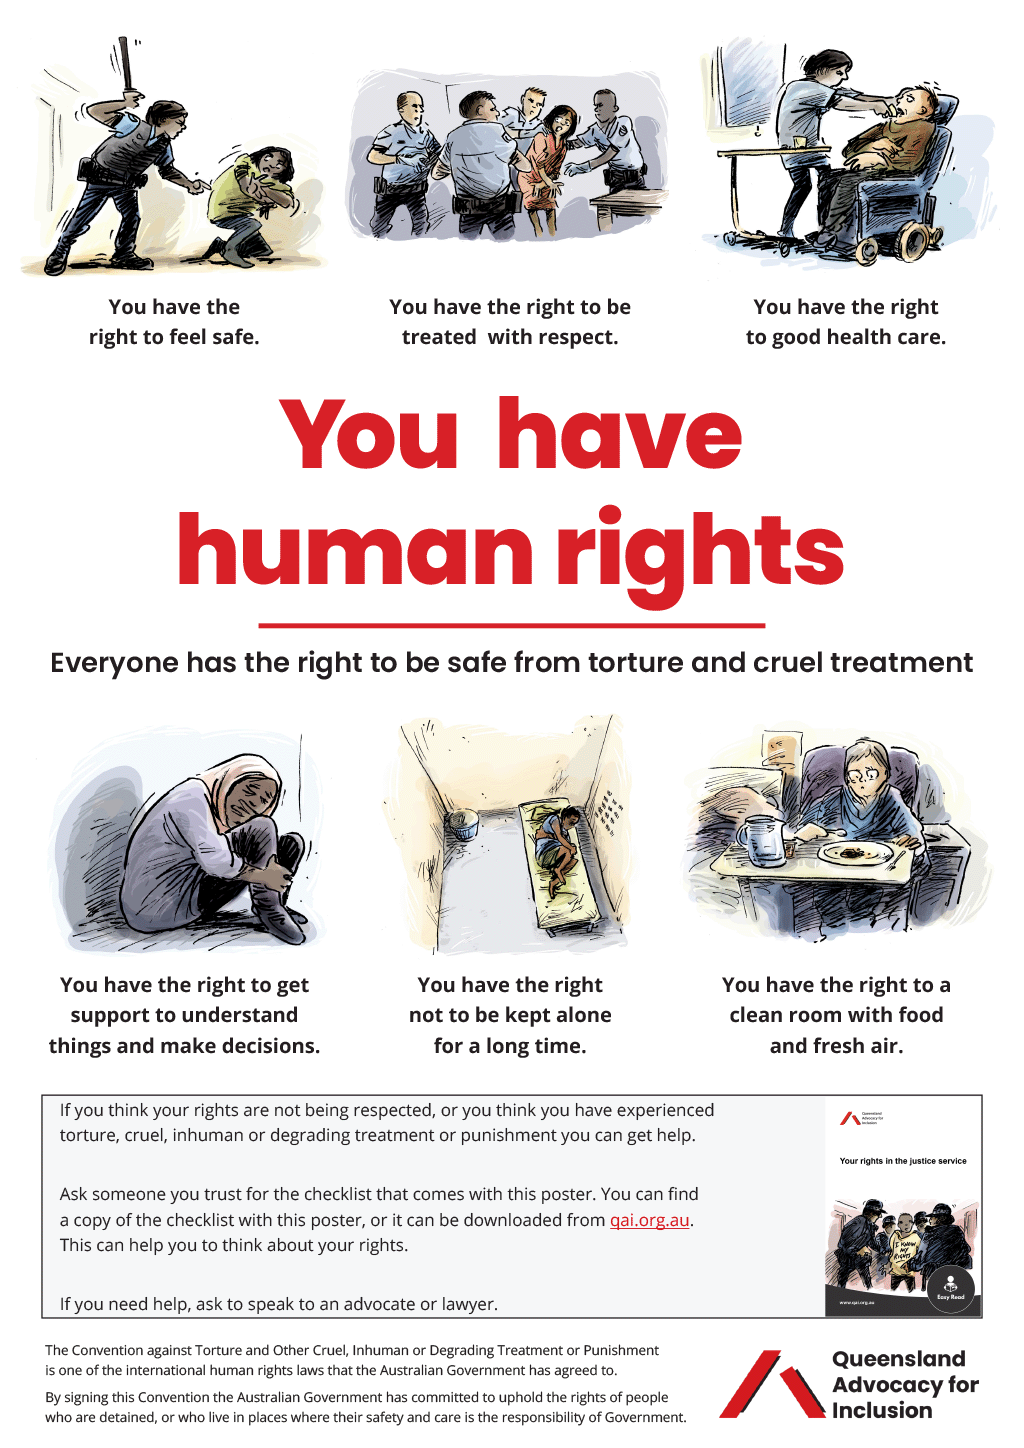 Cover page of checklist "Your rights in the justice system" with illustration of a person wearing a jumper that says "I know my rights" and is surrounded by 4 police officers. Bottom of the page has Easy Read icon.